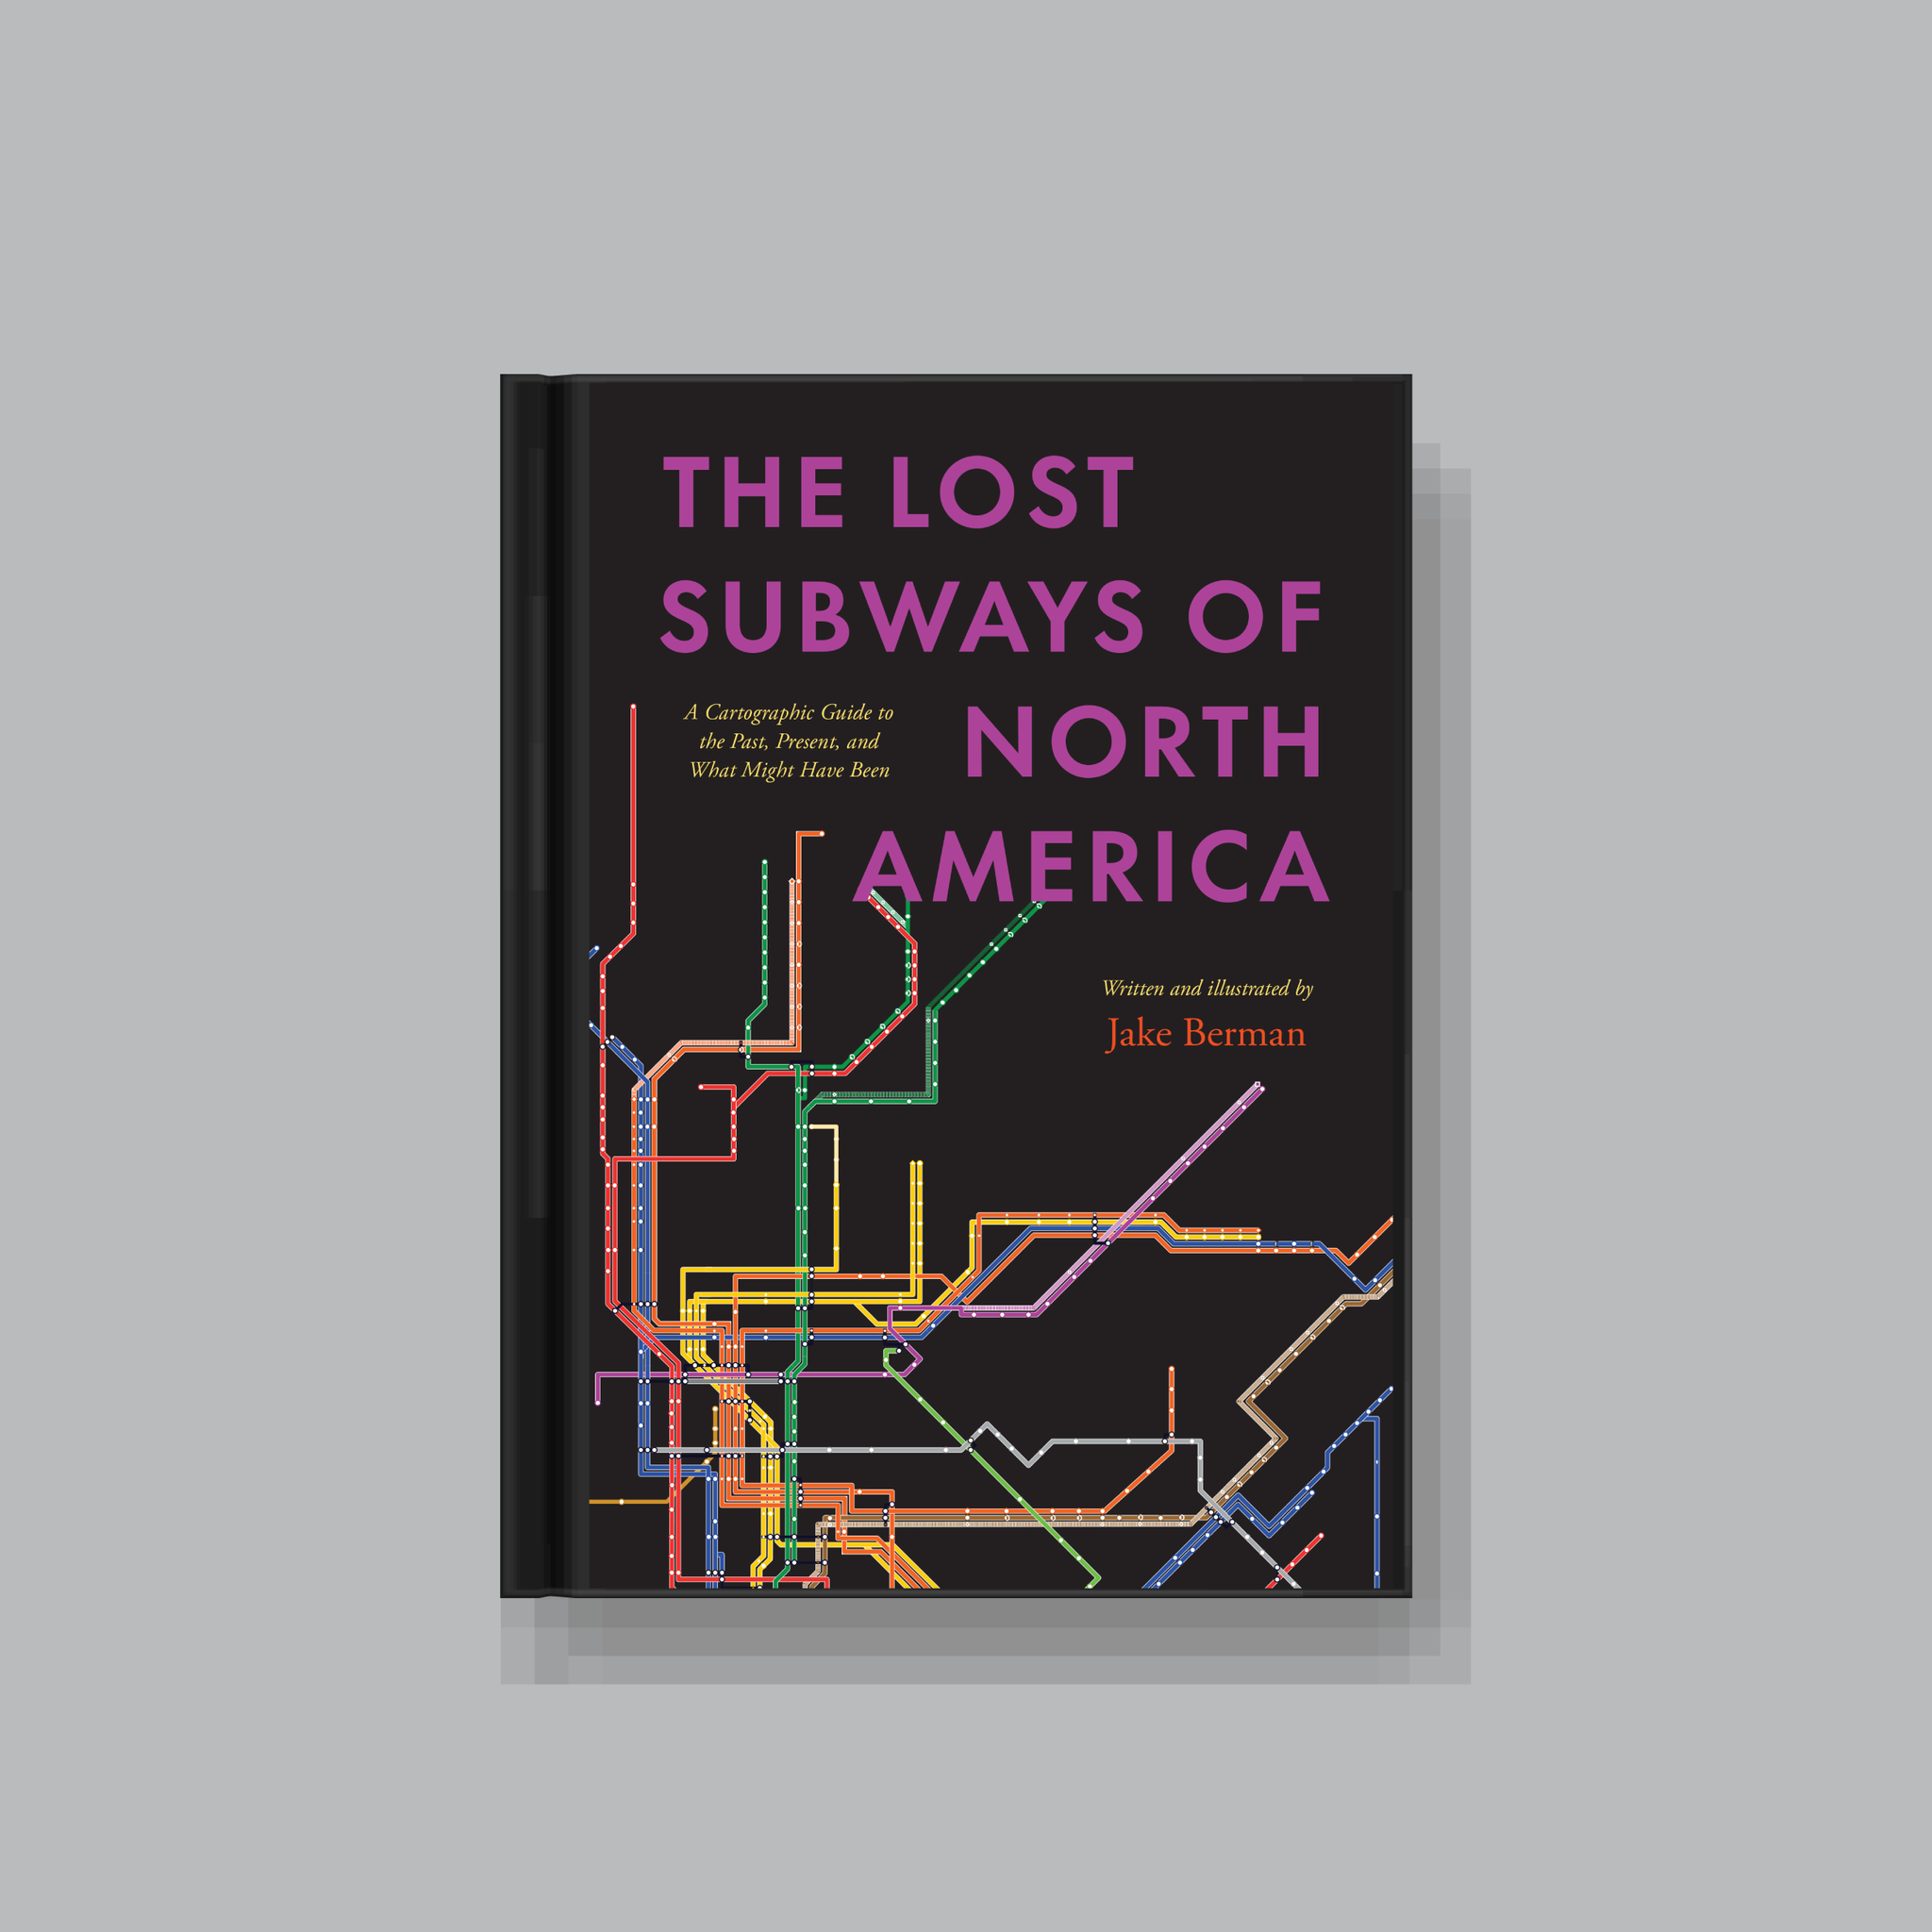 PRE-ORDER A SIGNED COPY: The Lost Subways of North America: A Cartographic Guide to the Past, Present and What Might Have Been